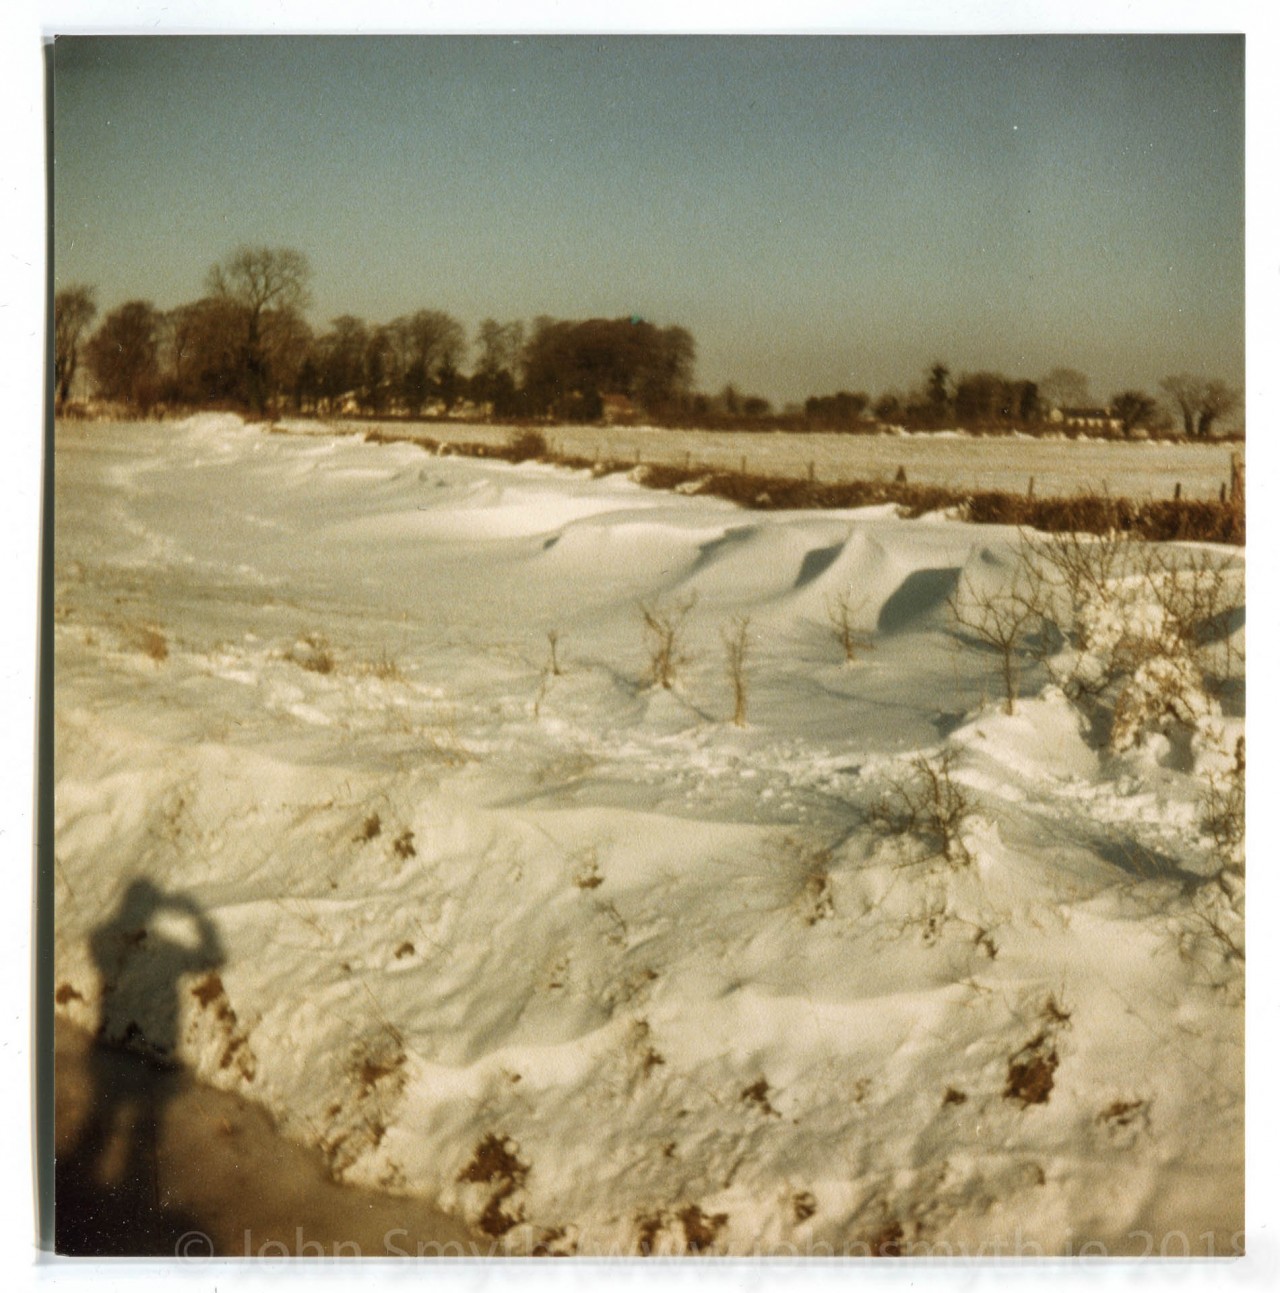 Snowdrifts in Rahugh, co. Westmeath in 1982